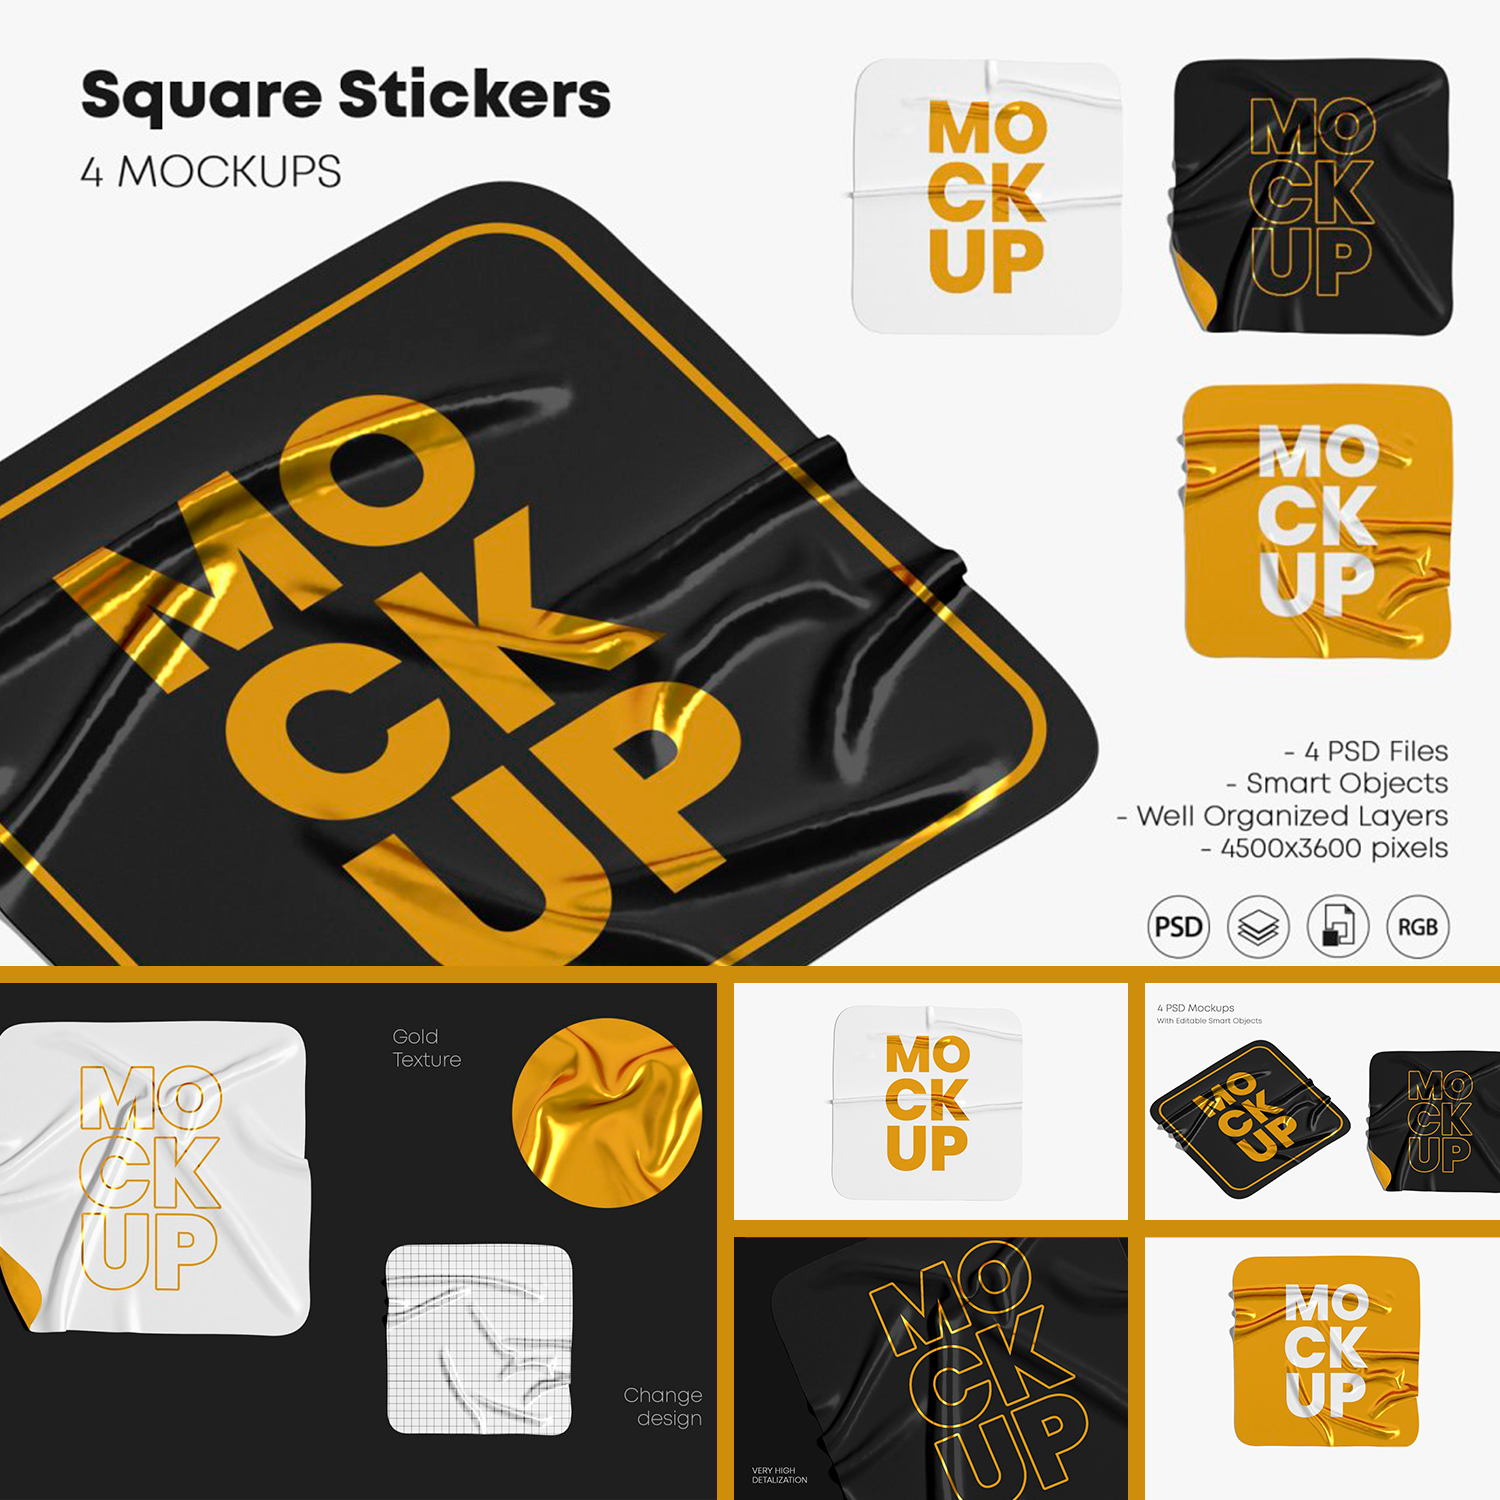 Set of images of adorable square crumpled stickers.